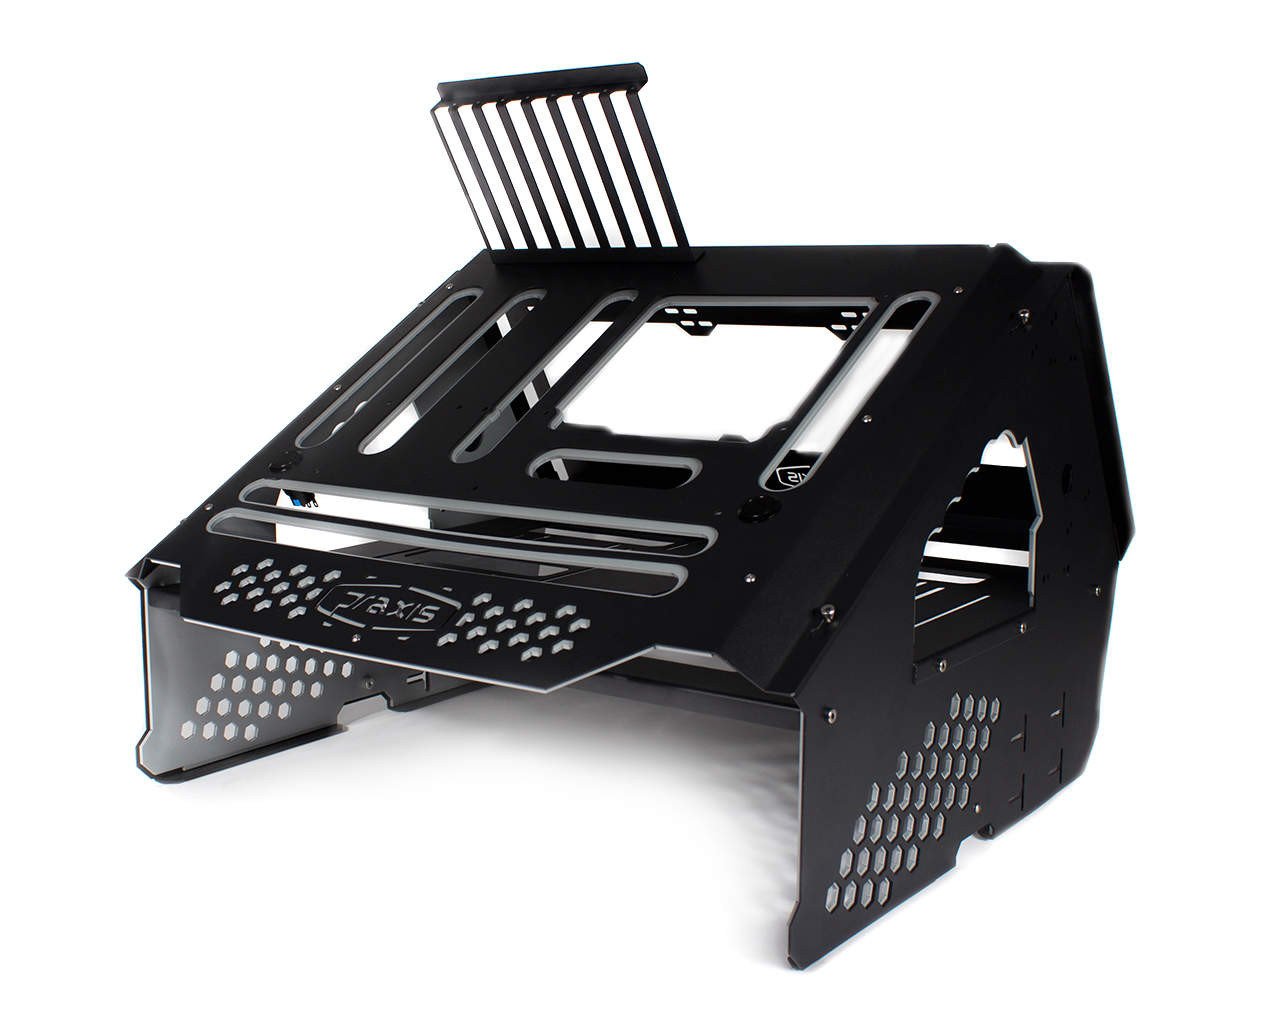 PrimoChill's Praxis Wetbench Powdercoated Steel Modular Open Air Computer Test Bench for Watercooling or Air Cooled Components - PrimoChill - KEEPING IT COOL Black w/Solid Grey Accents